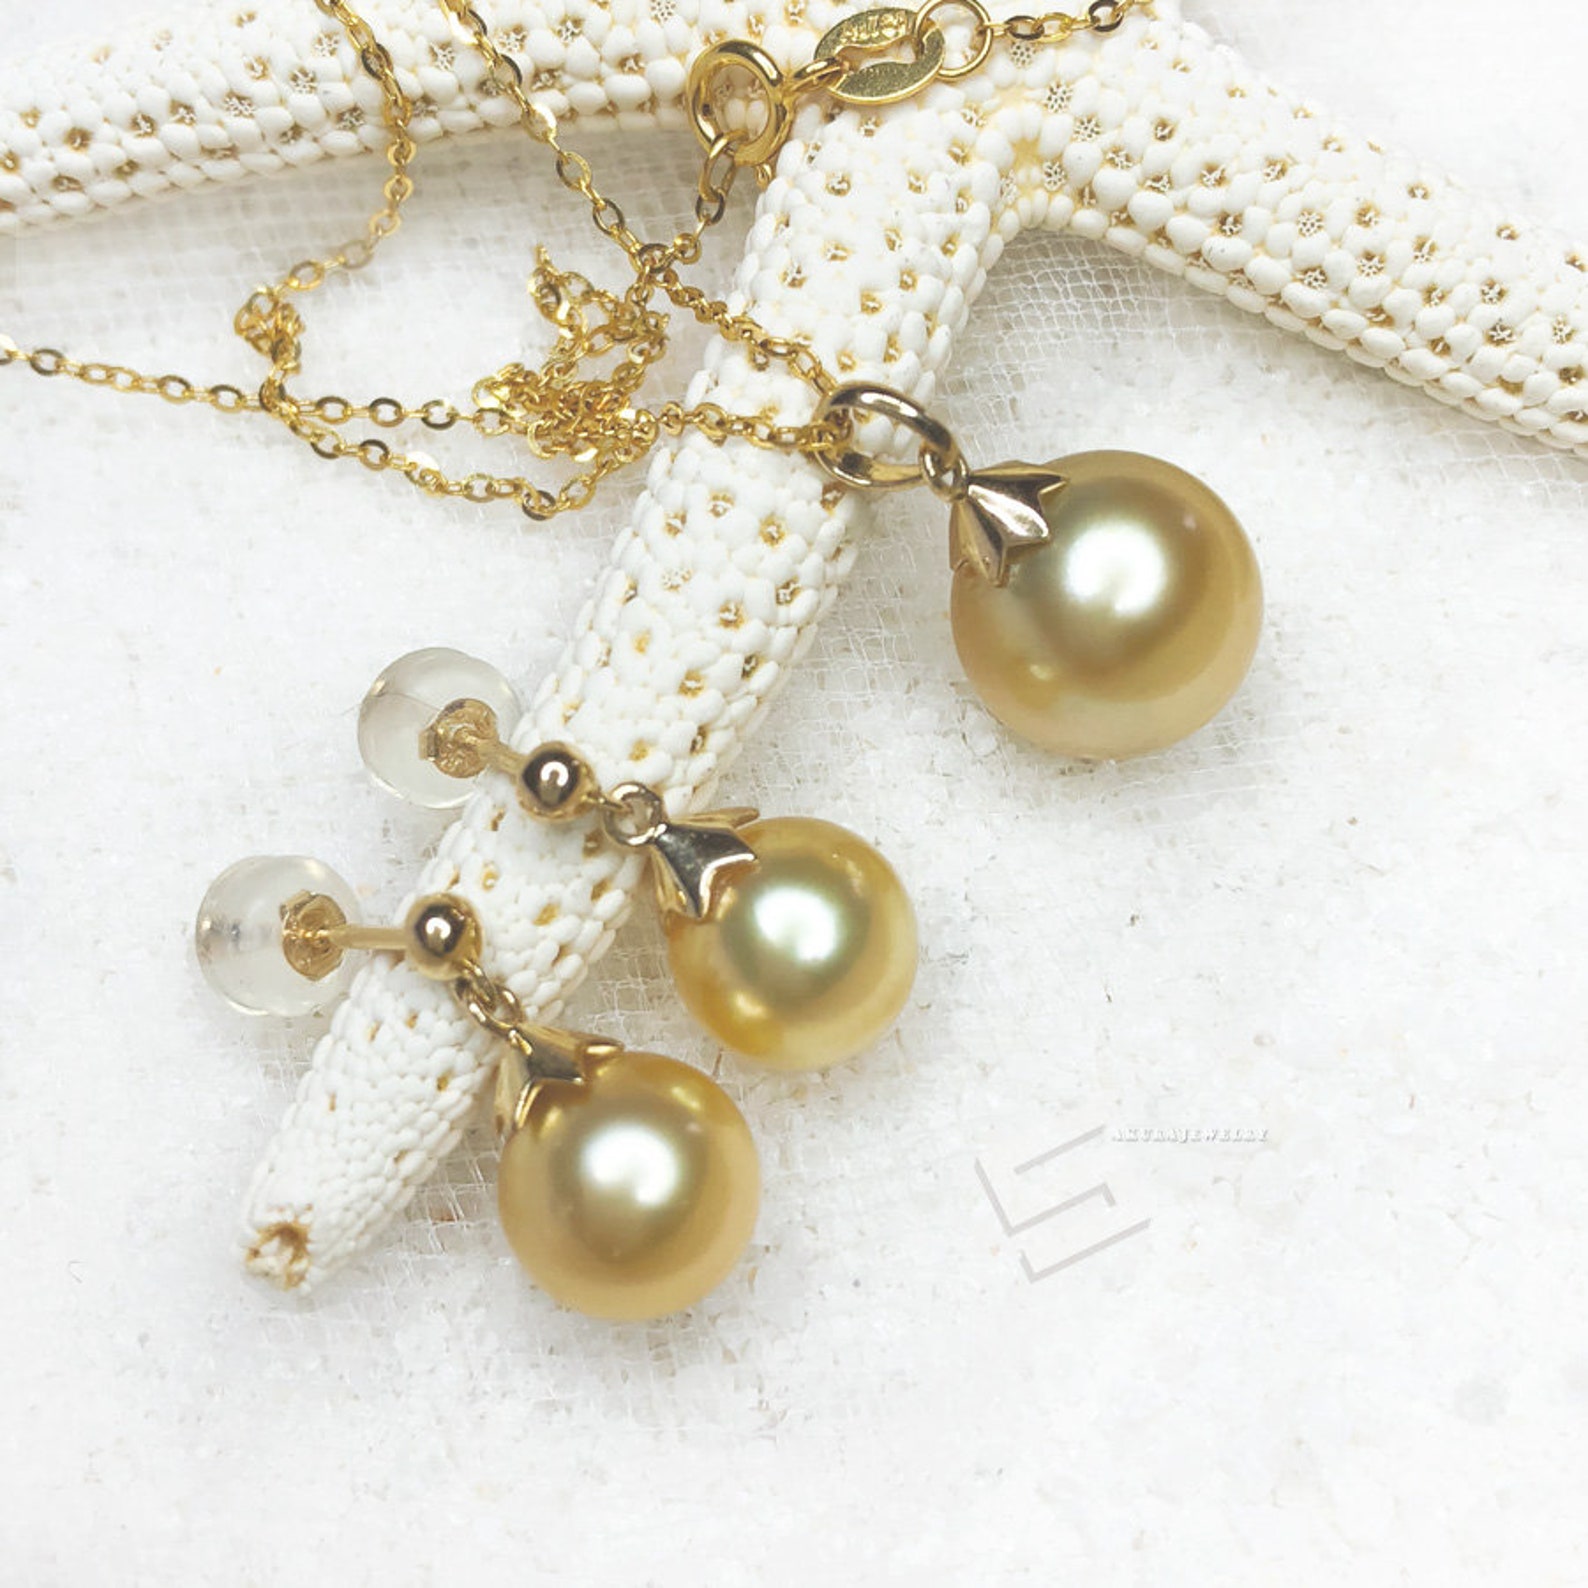 Real Golden Pearls in Solid Gold Jewelry Set Saltwater Pearls - Etsy